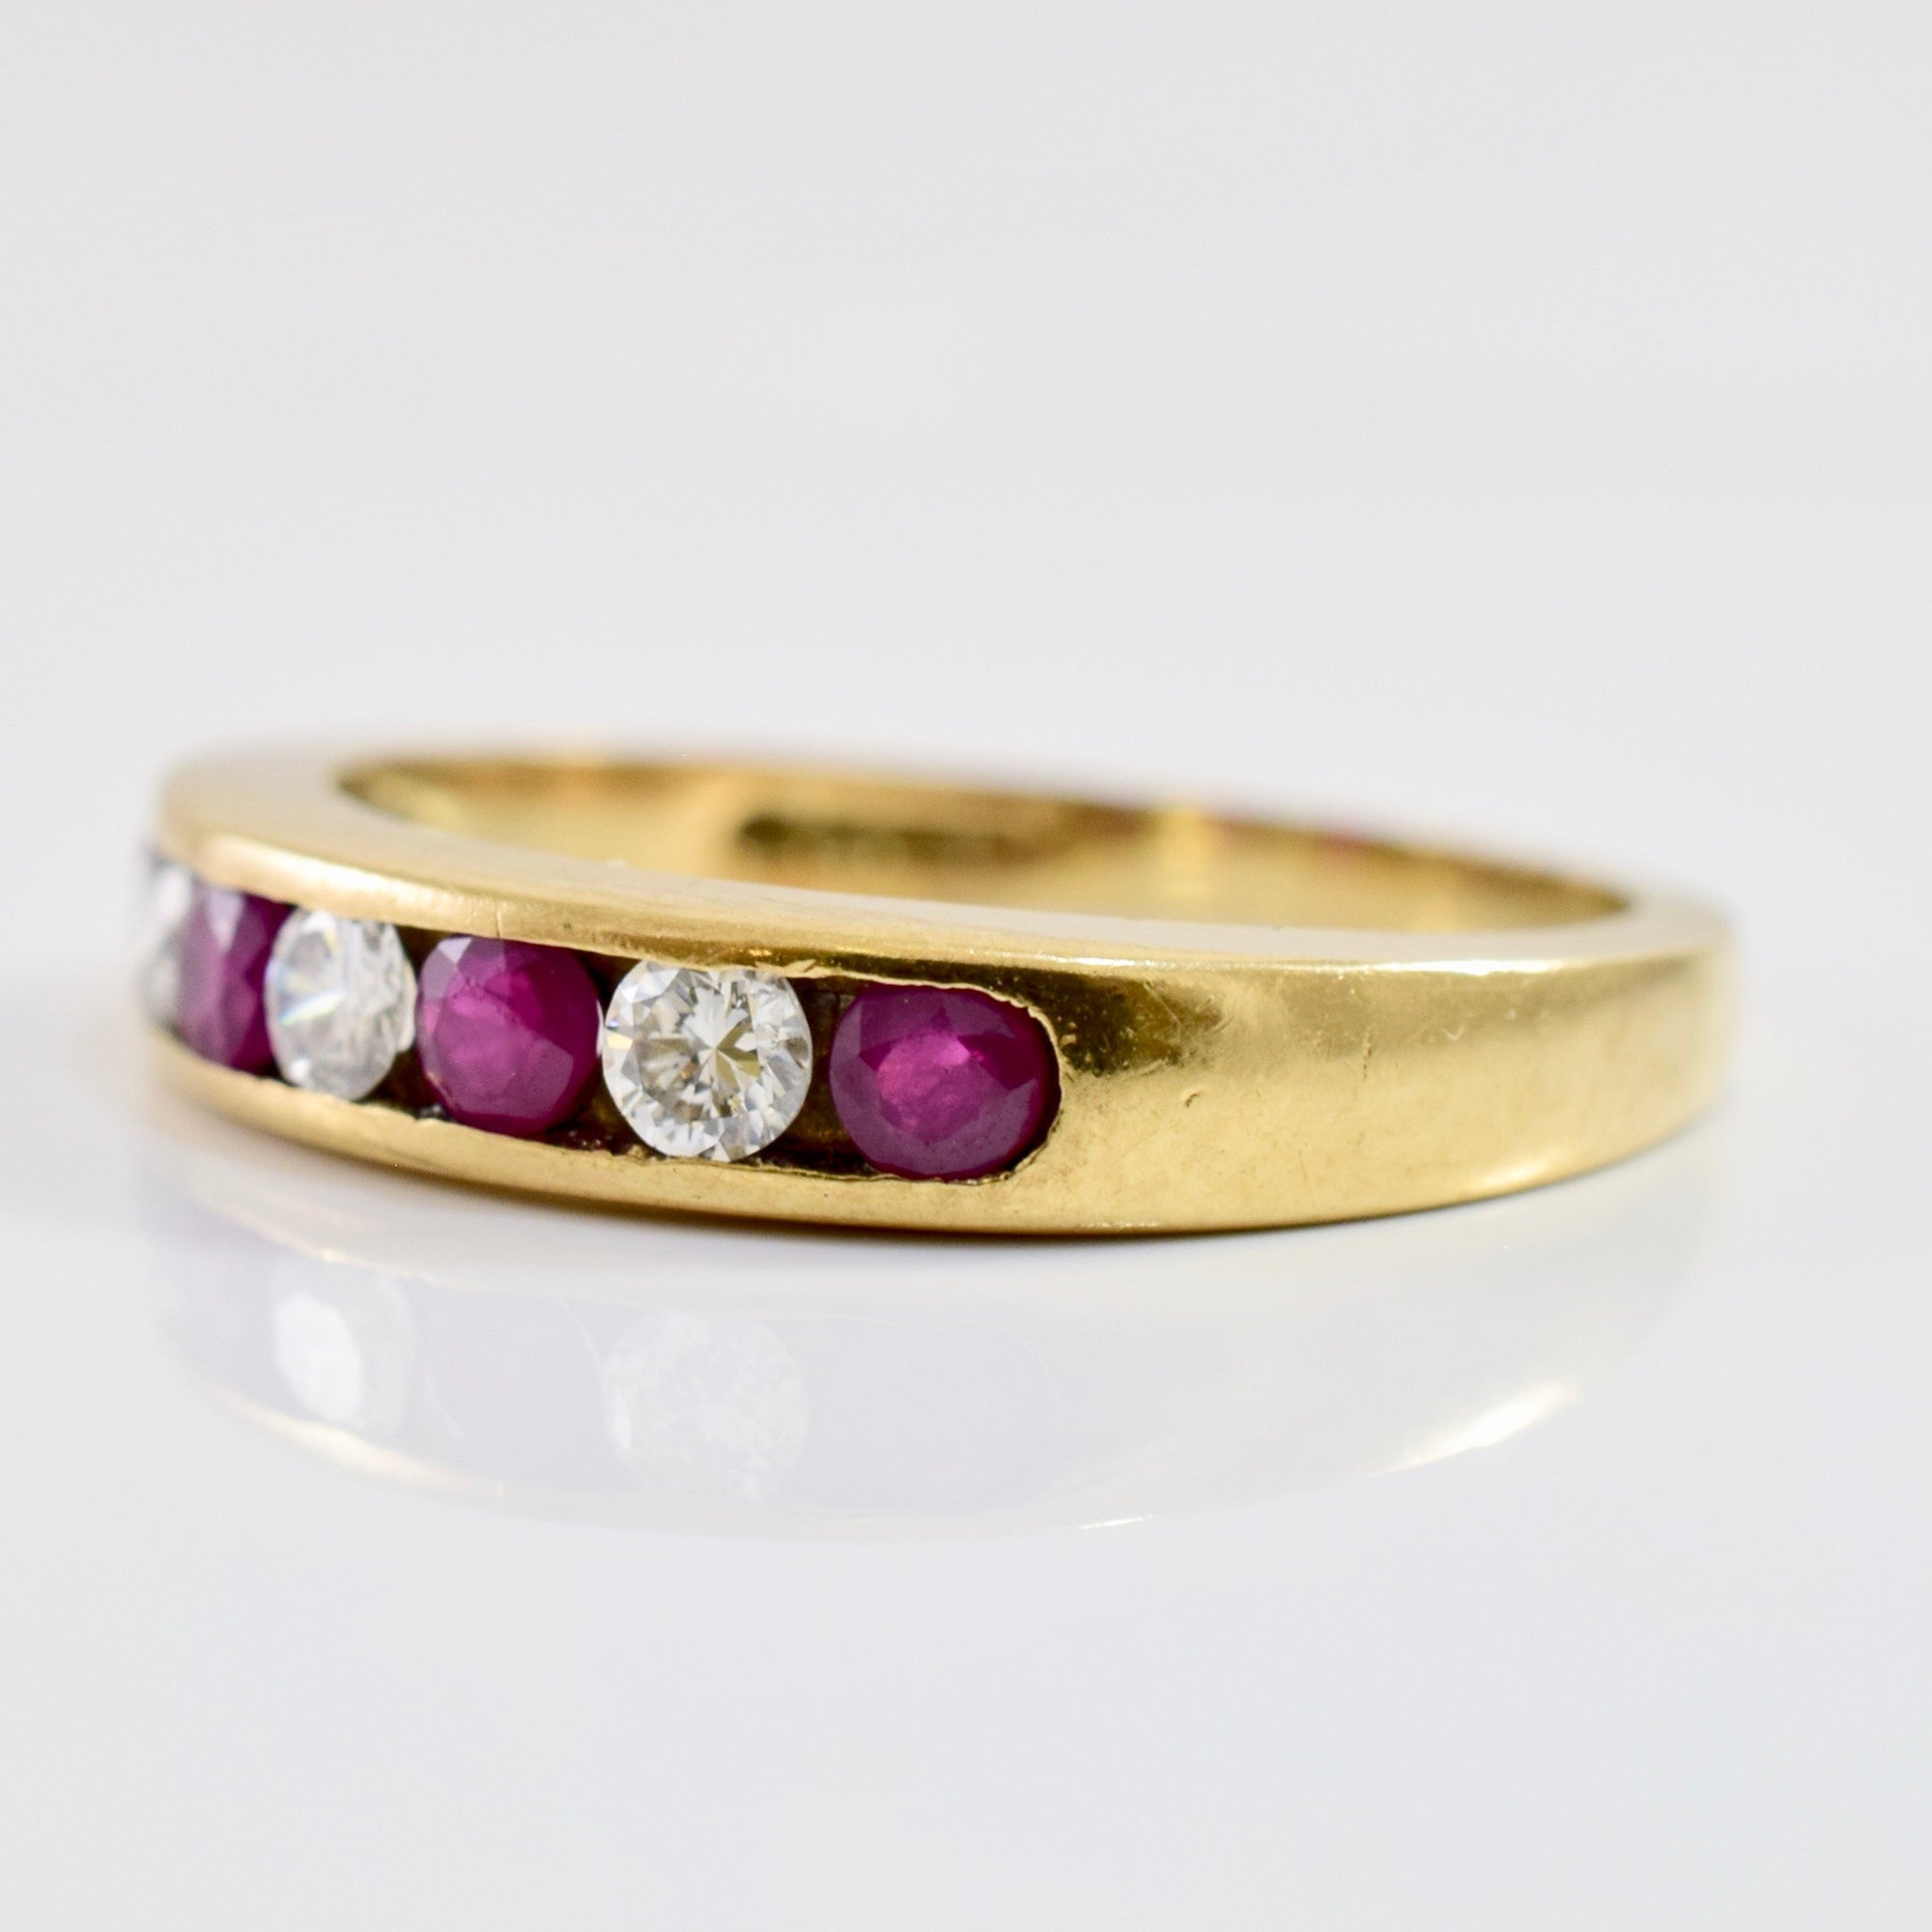 Channel Set Diamond and Ruby Ring | 0.16 ctw SZ 6 |